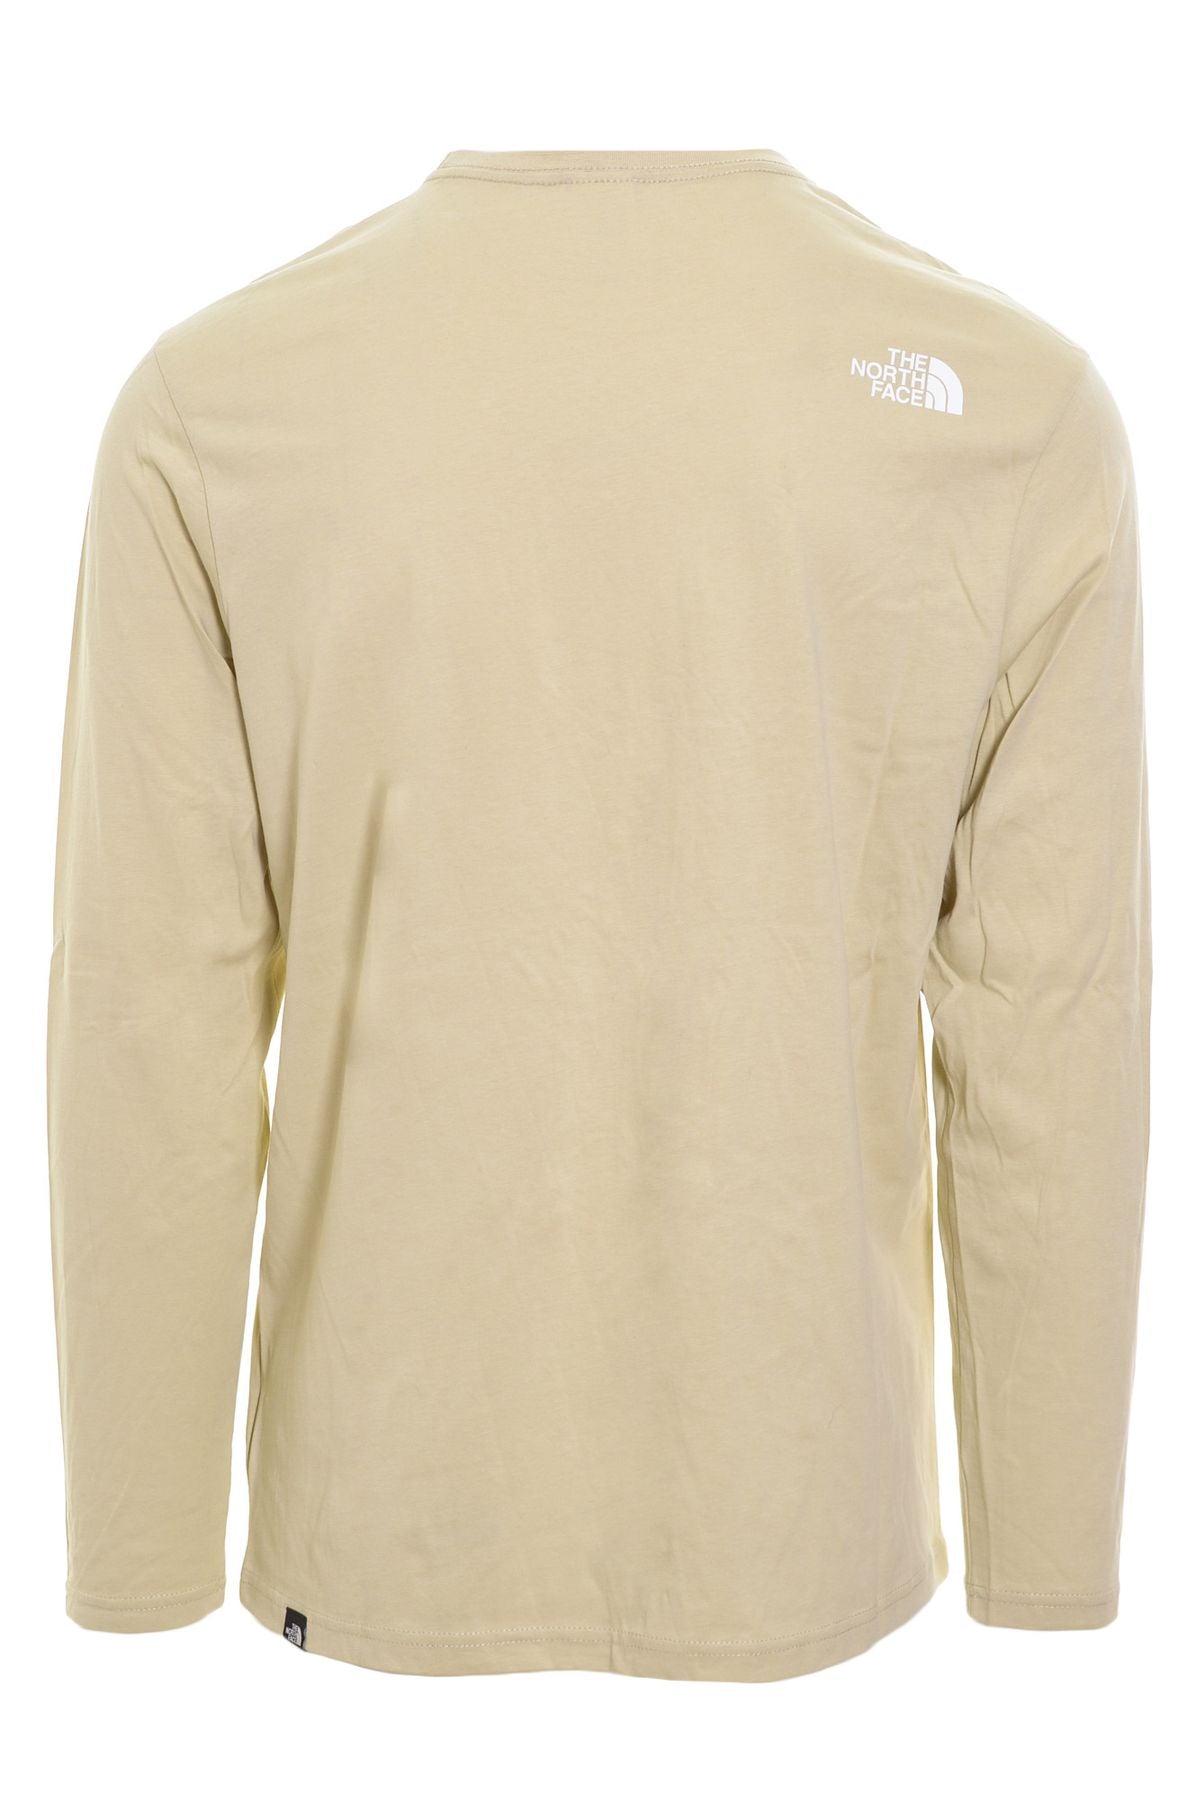 THE NORTH FACE T-shirt Autunno/Inverno nf0a55853x4s